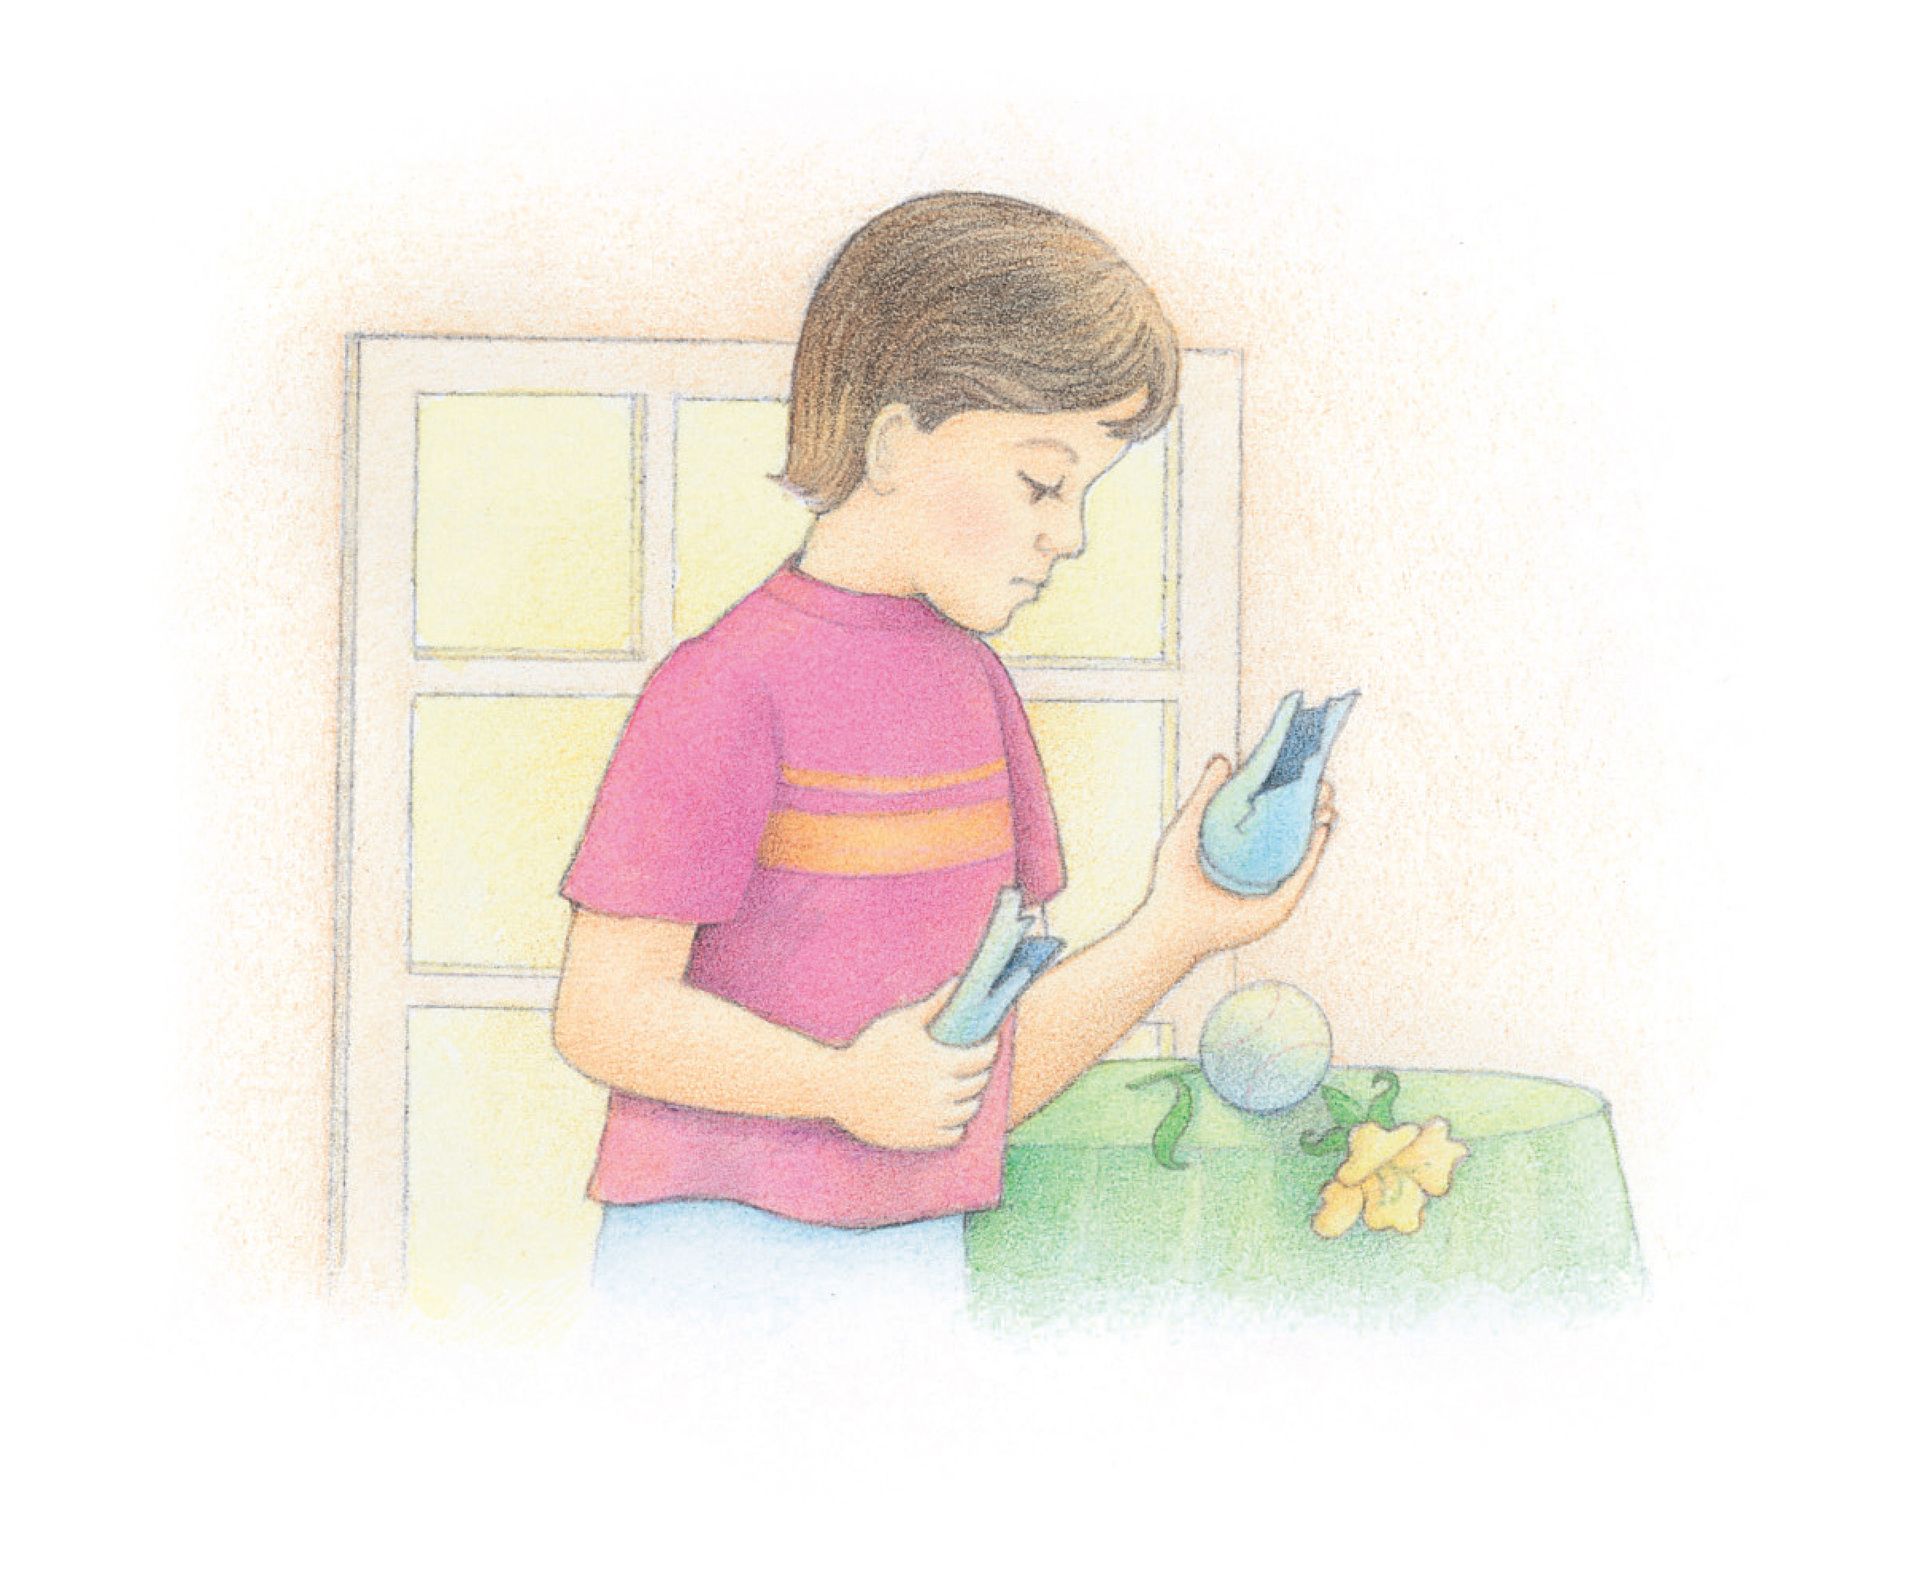 A boy looking sadly at a broken vase. From the Children’s Songbook, page 149, “I Believe in Being Honest”; watercolor illustration by Beth Whittaker.